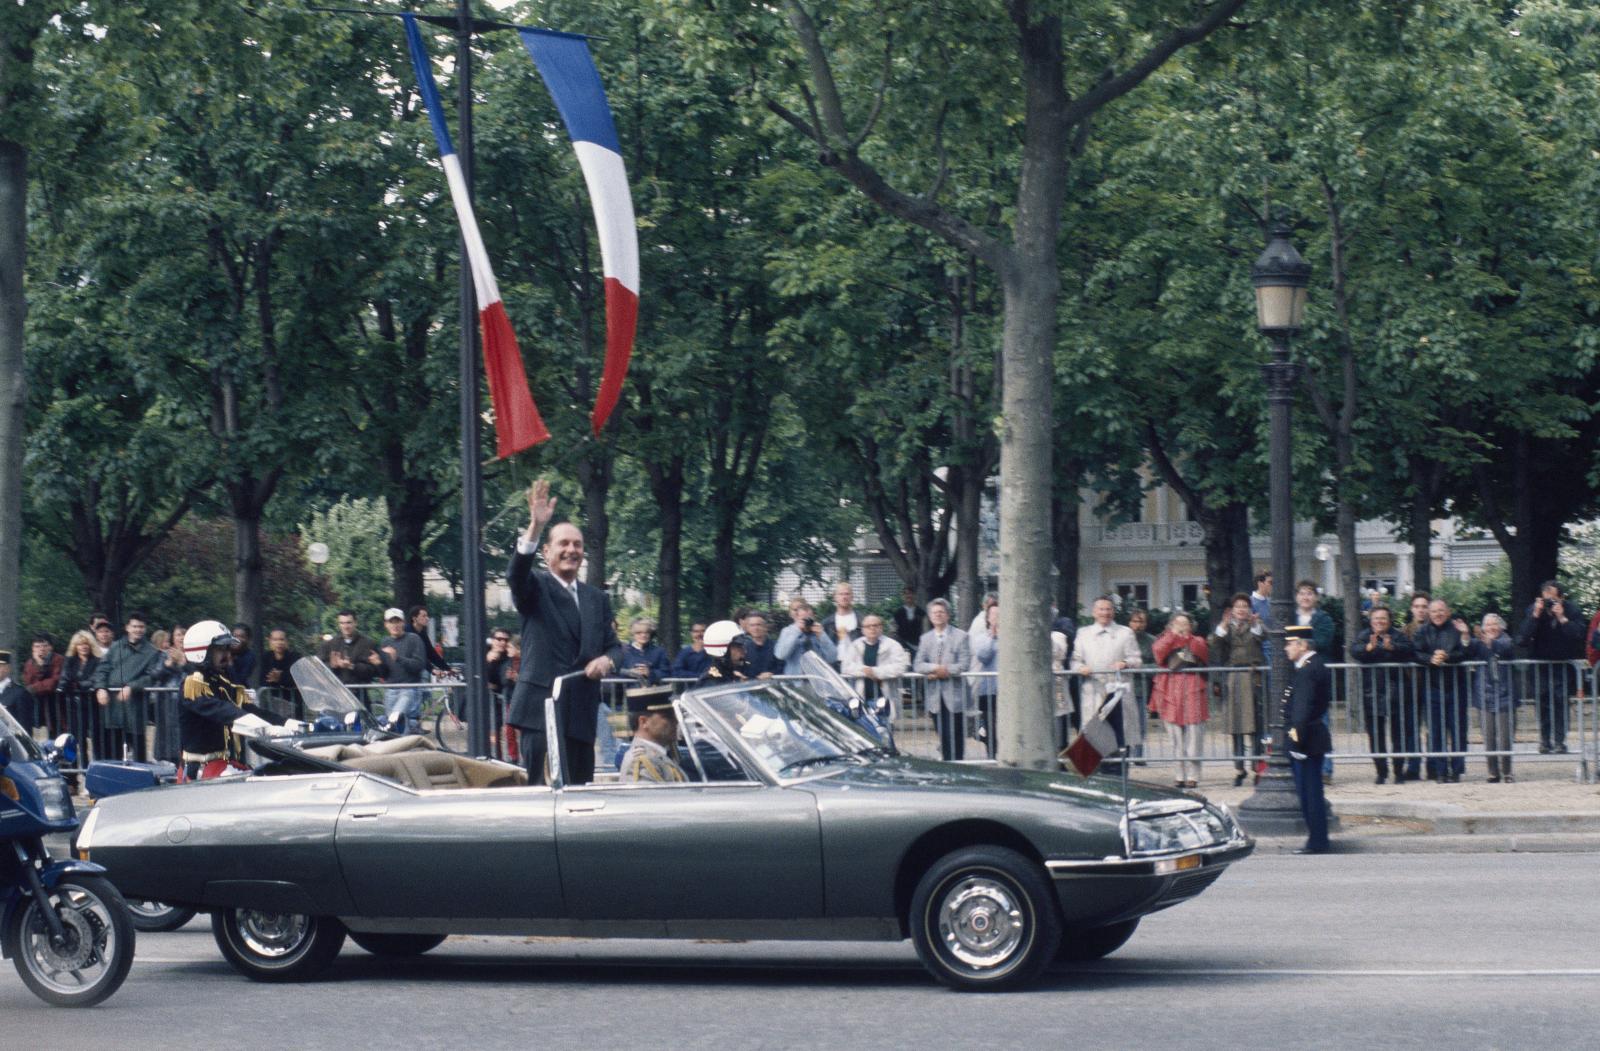 Jacques Chirac aboard the presidential SM - 1995